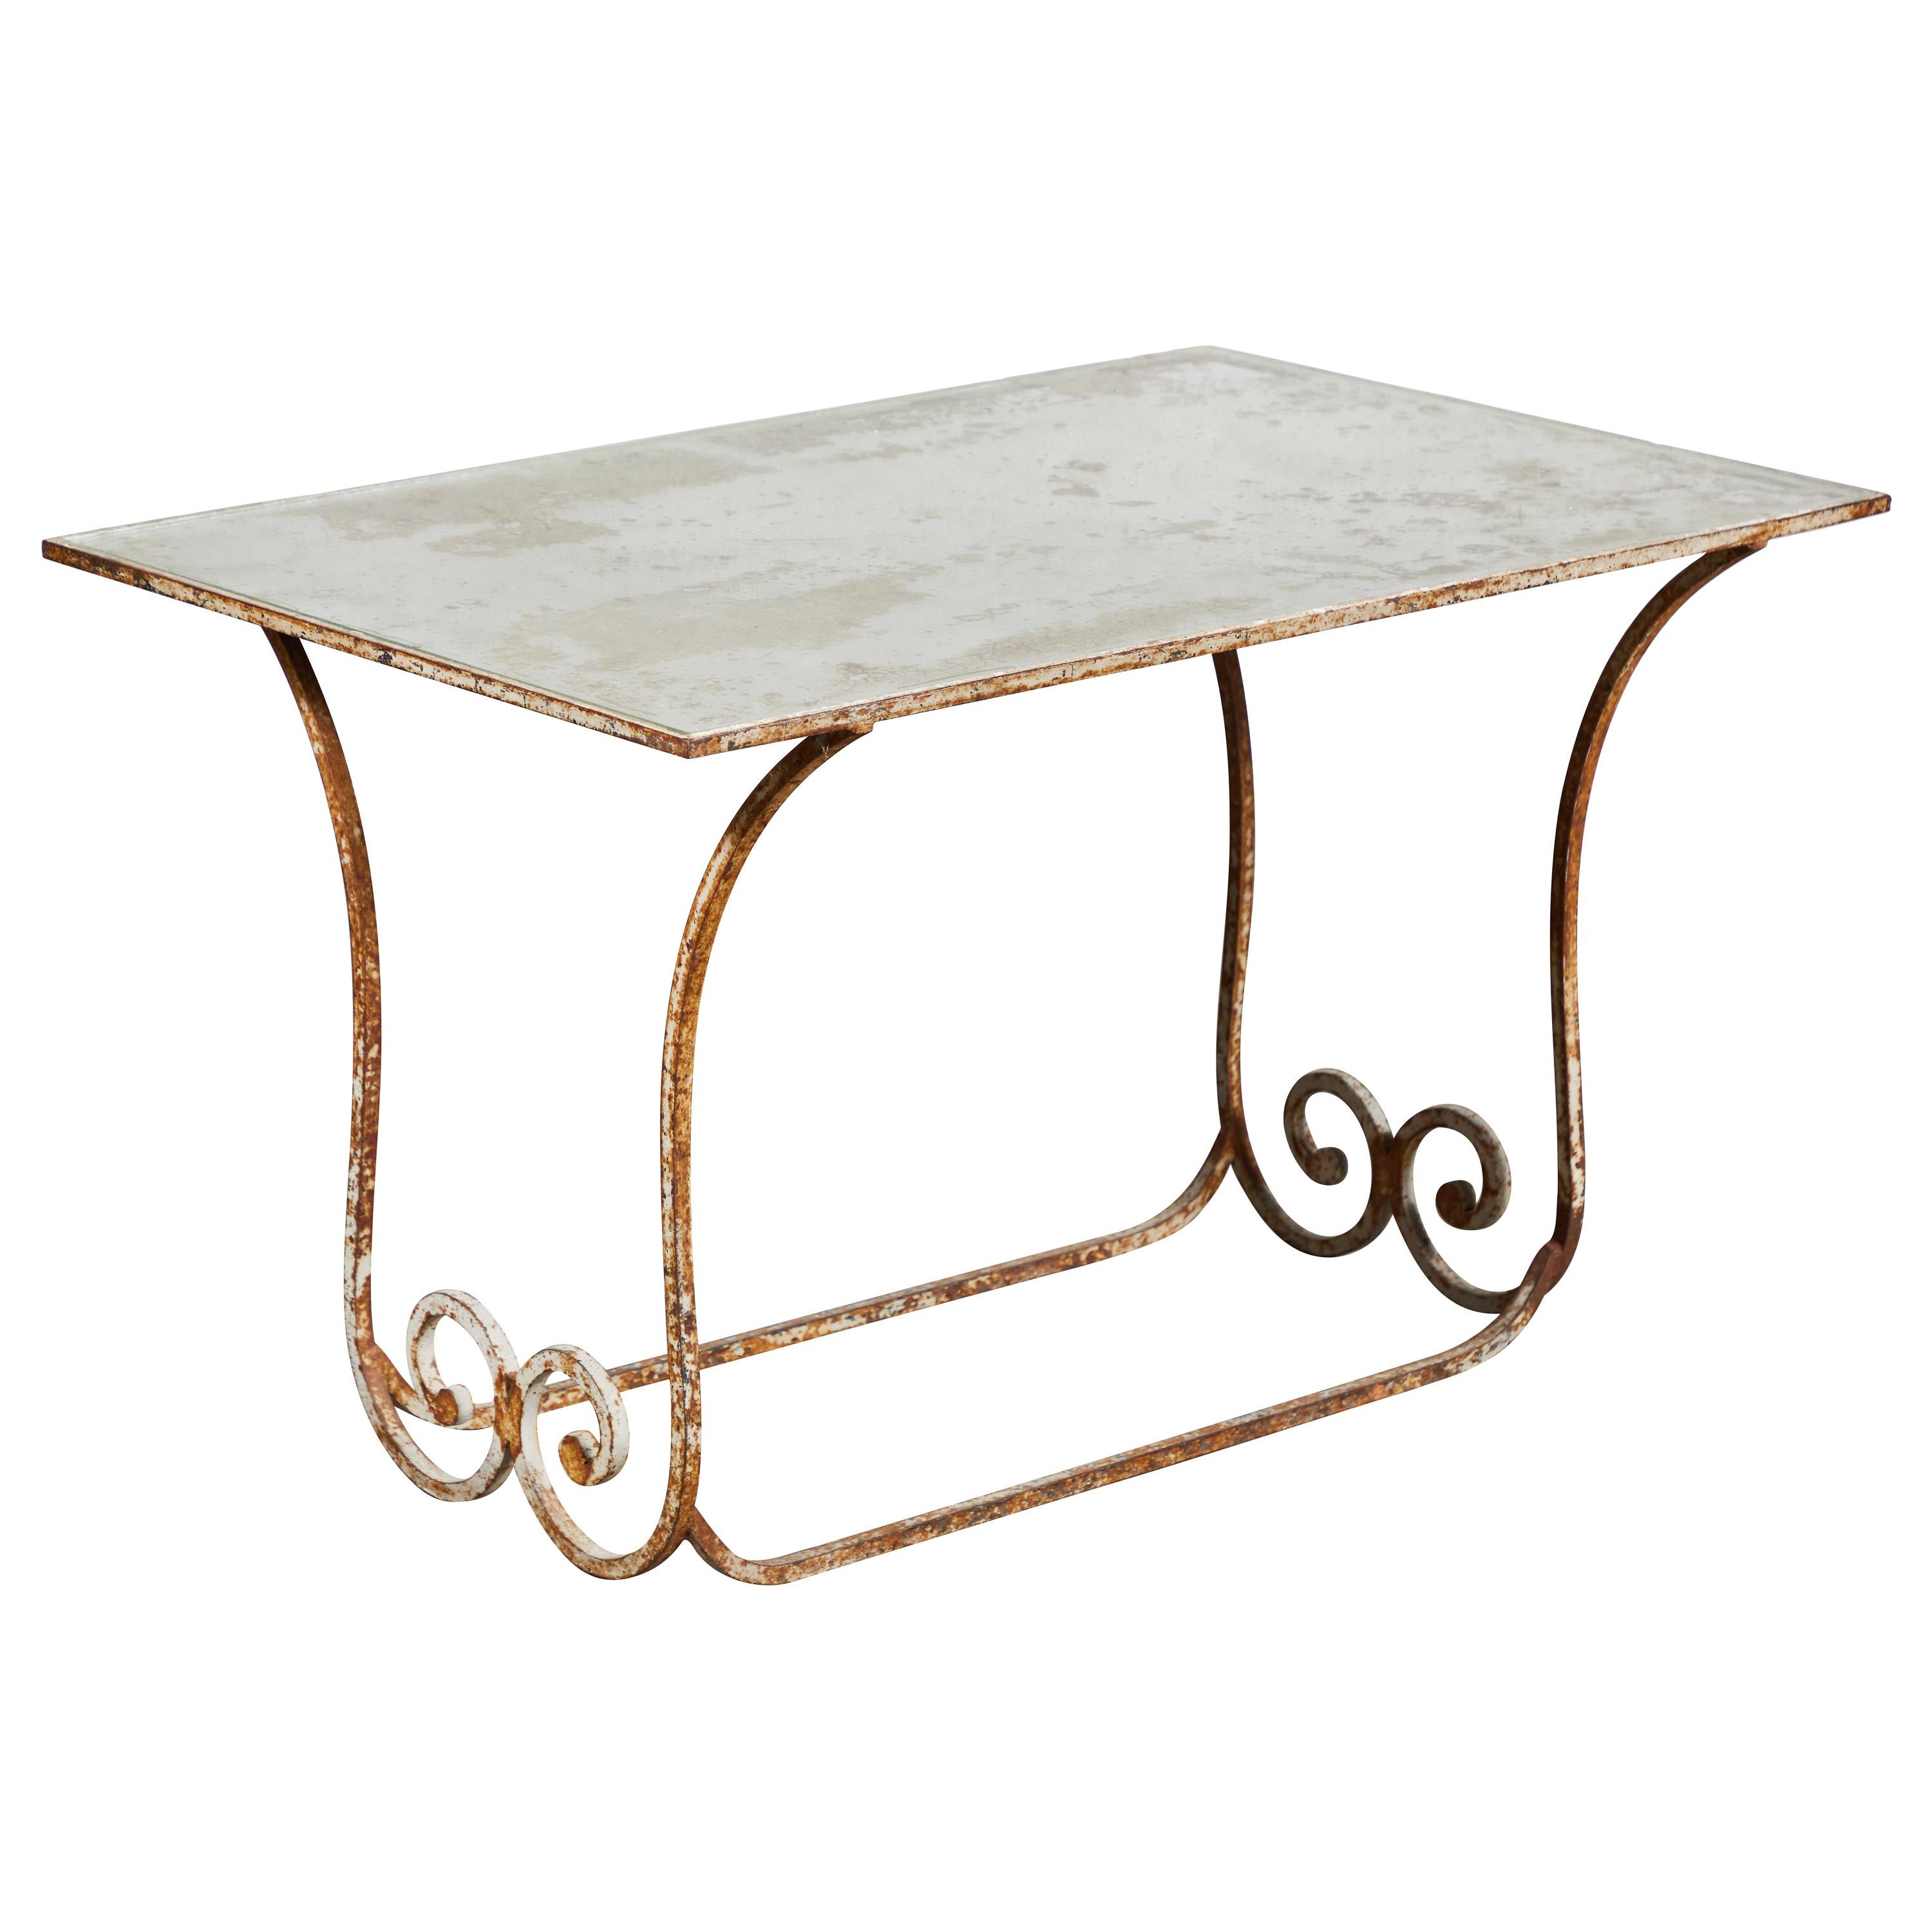 French Ornate Wrought Iron Garden Table with Mirrored Top